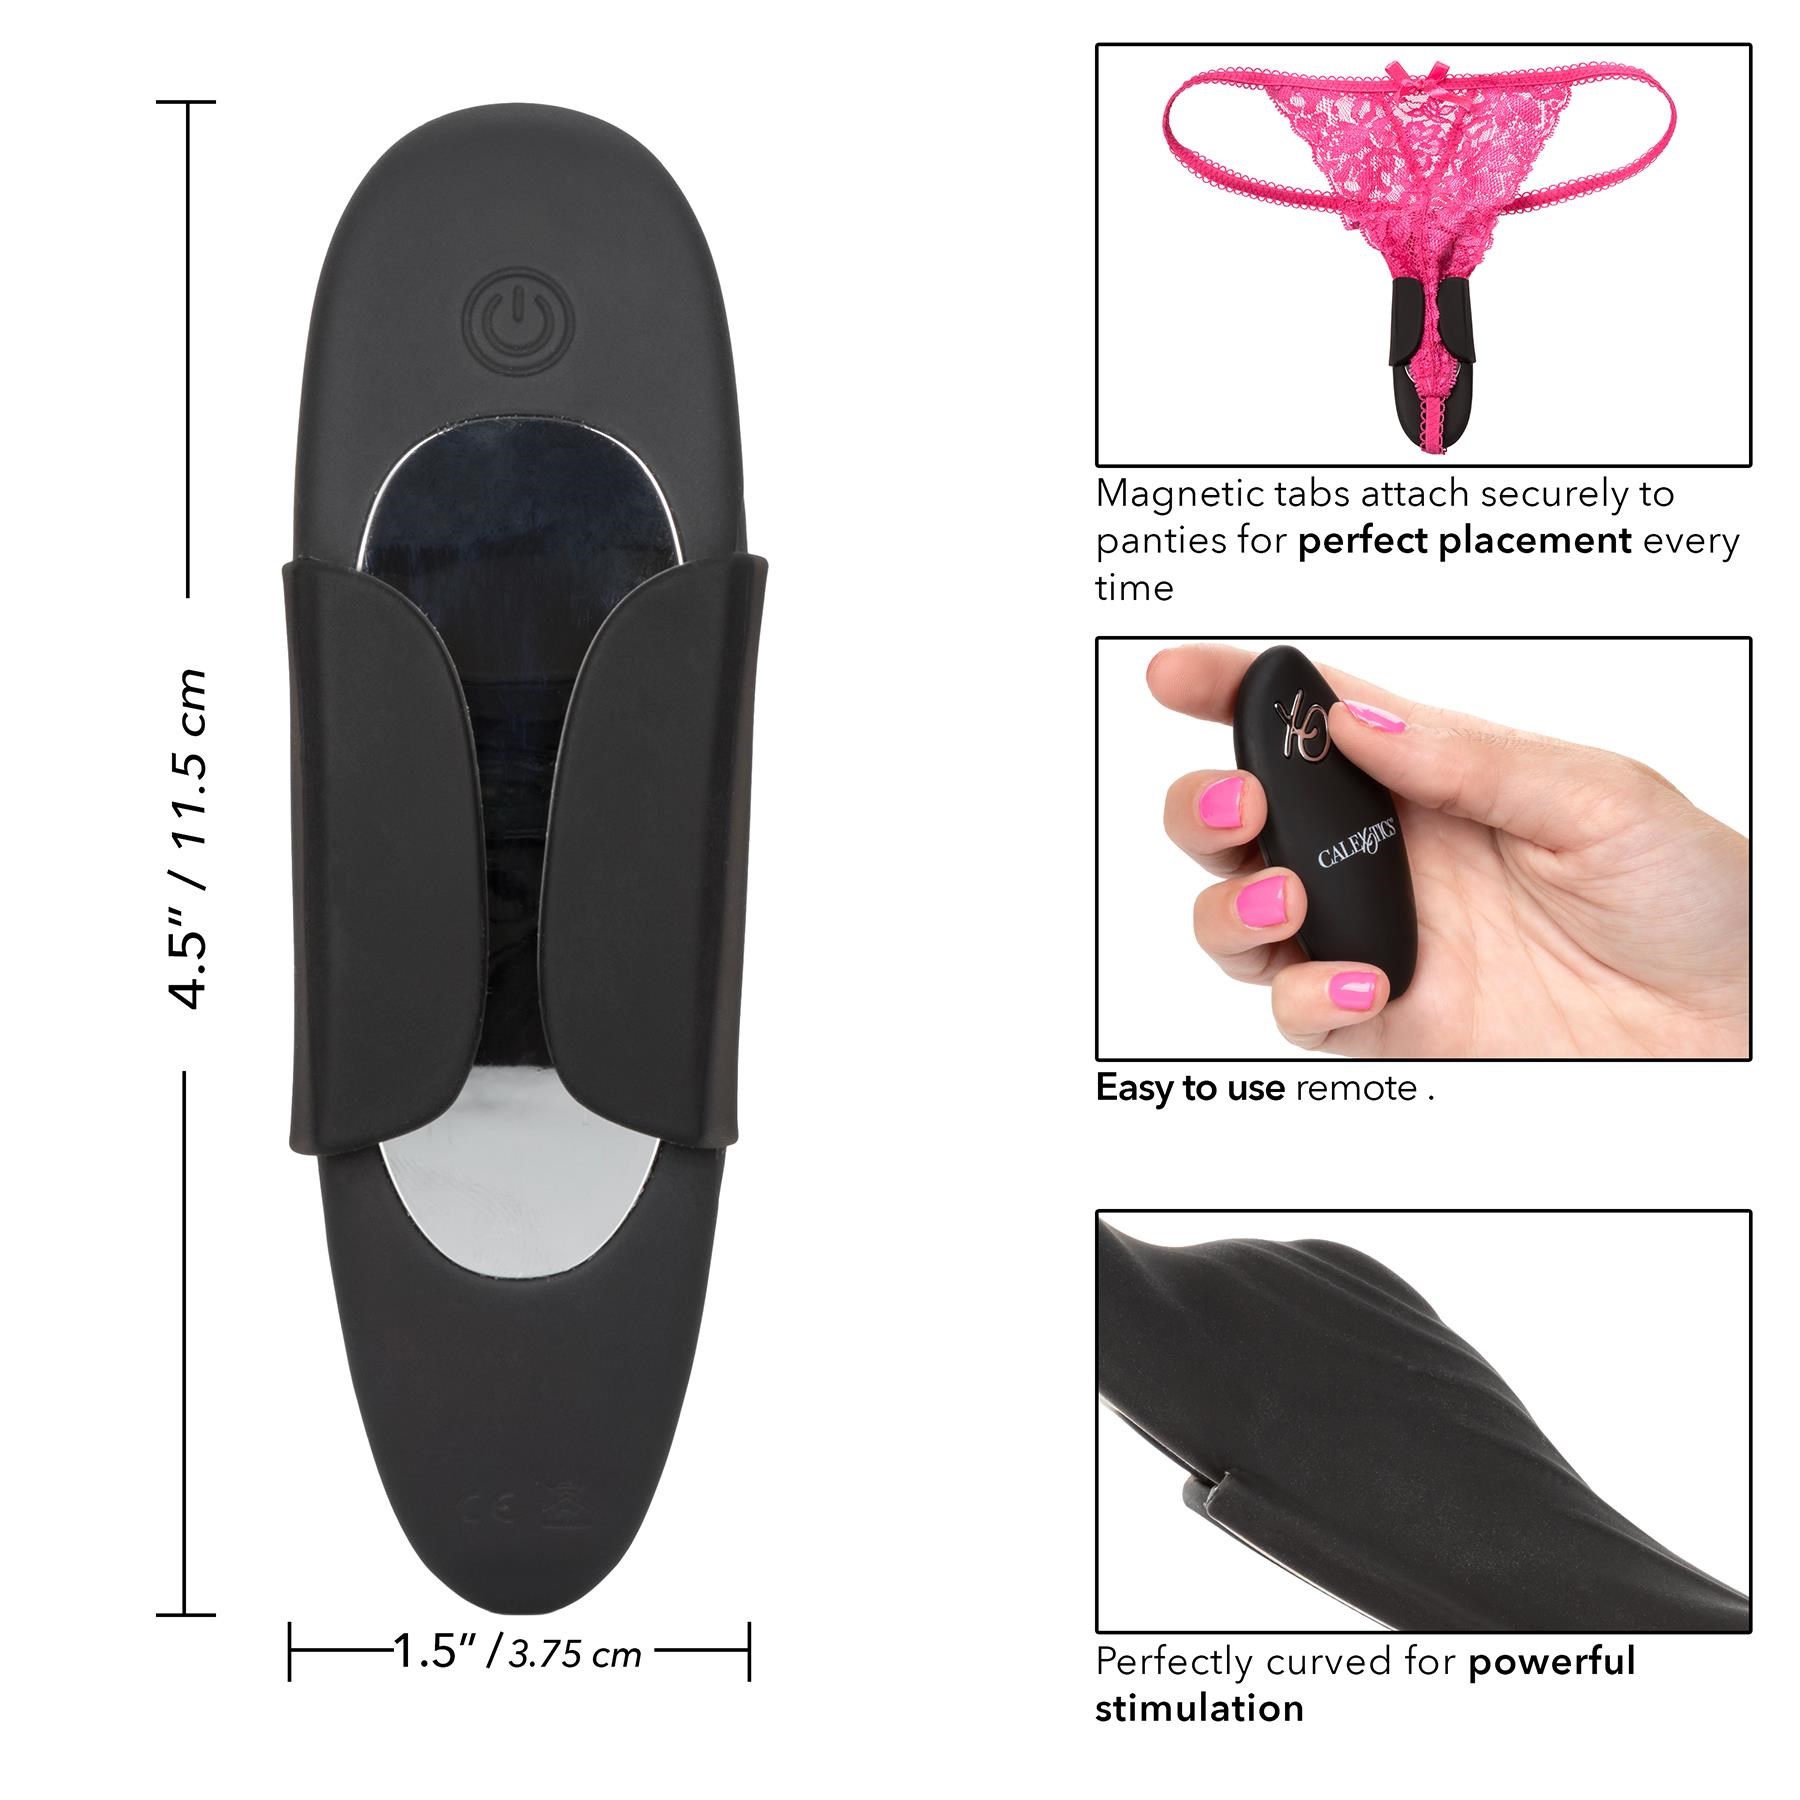 Lock-N-Play Remote Panty Teaser - Dimensions and Instructions